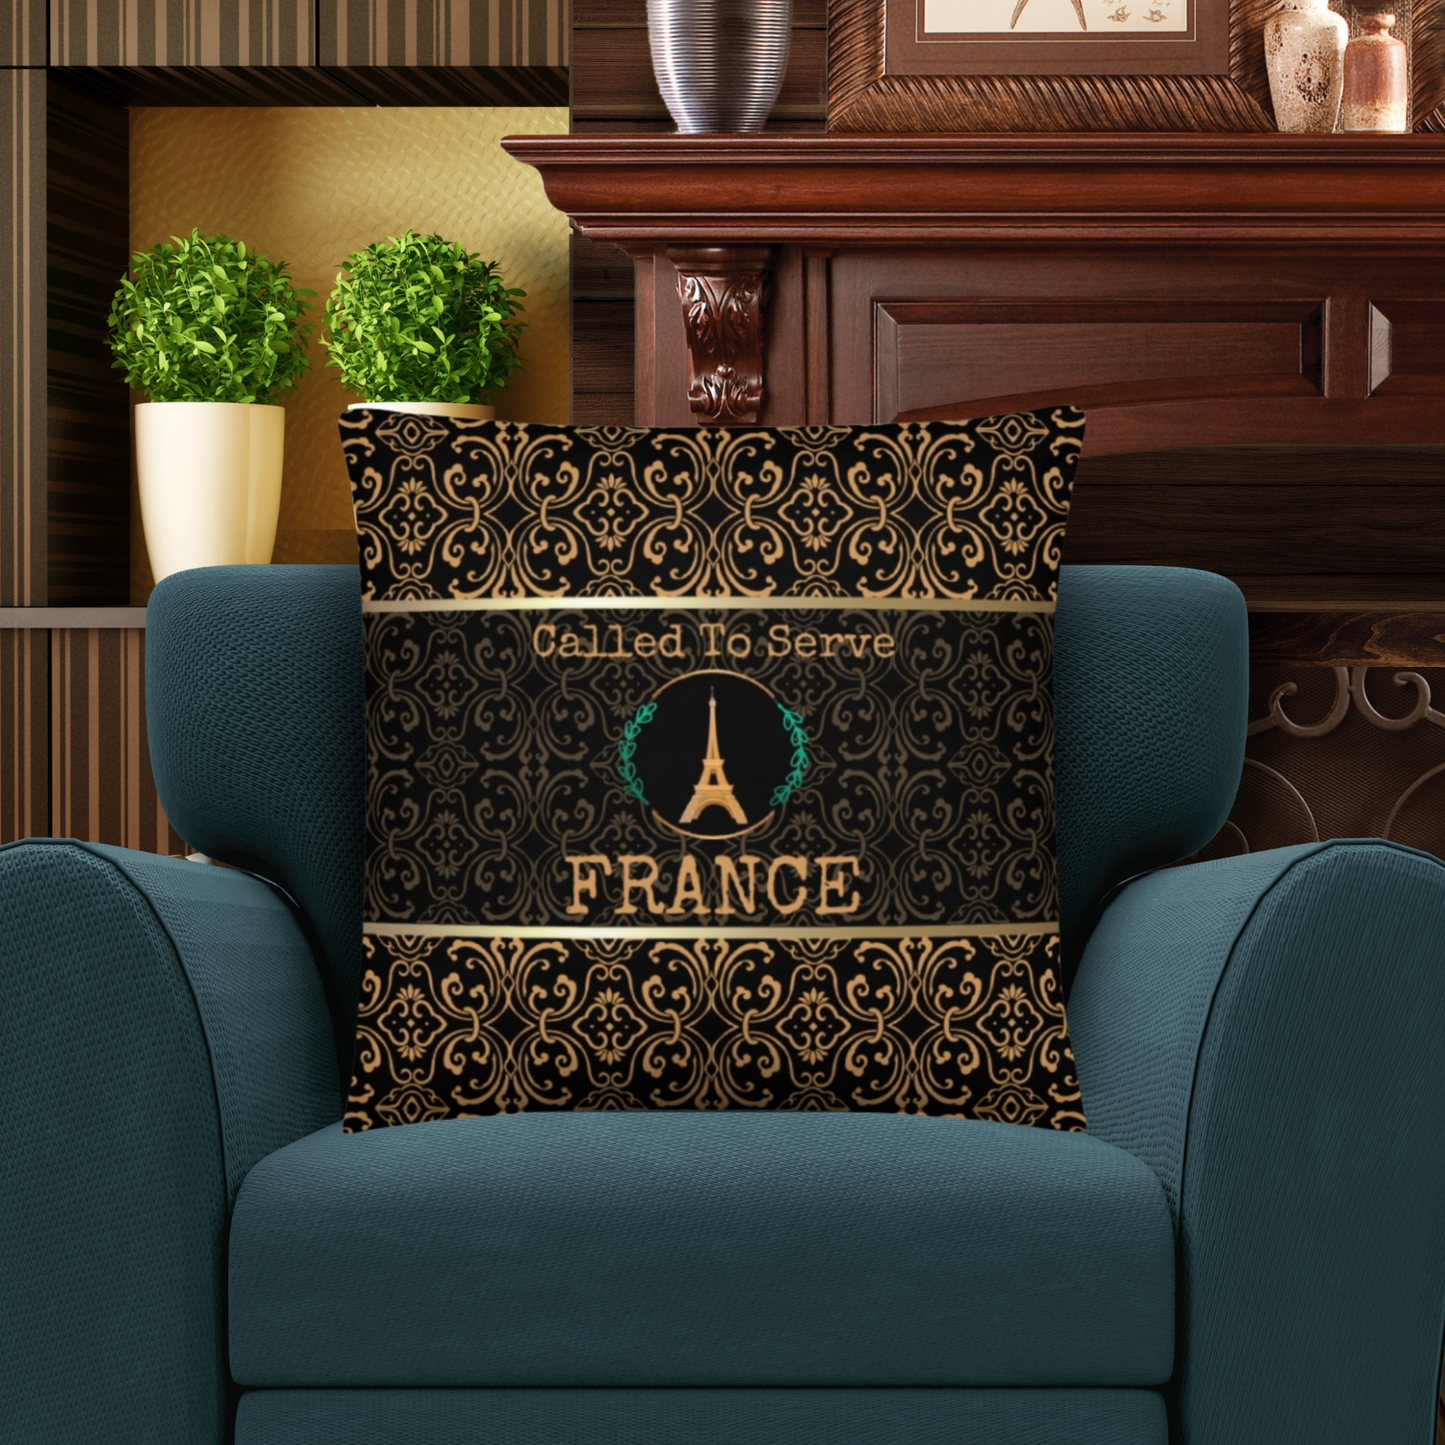 France Missionary Gift | Best Missionary Gift Ideas | Mission Call Gifts | Called to Serve Gifts | Missionary Mom Gifts | Best Latter Day Saint Gifts | LDS Missionary Gifts | France Home Decor